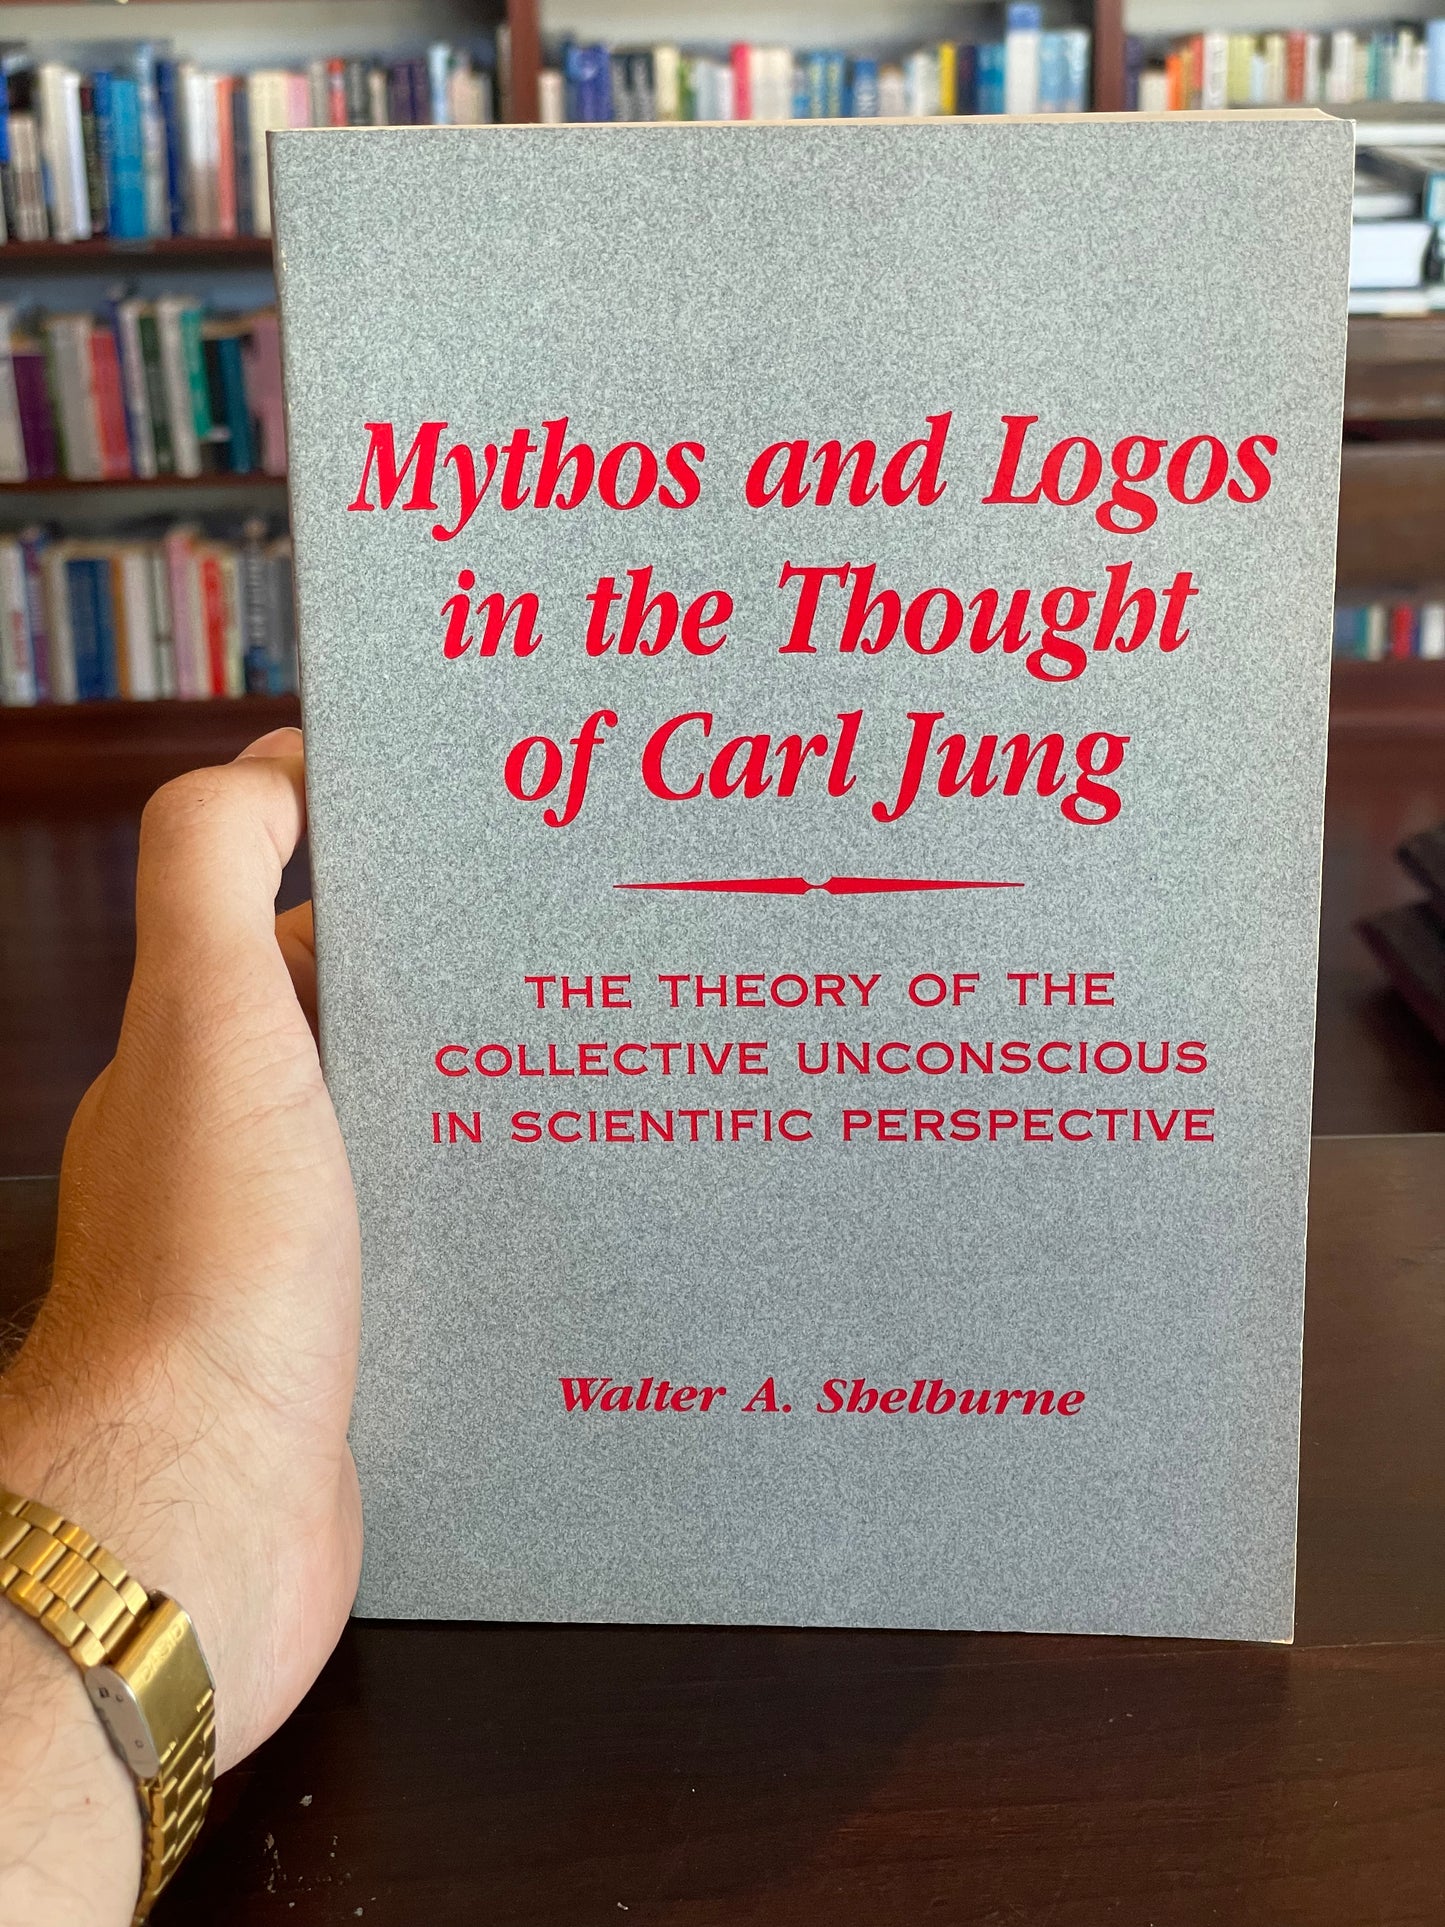 Mythos and Logos in the Thought of Carl Jung by Walter A. Shelburne